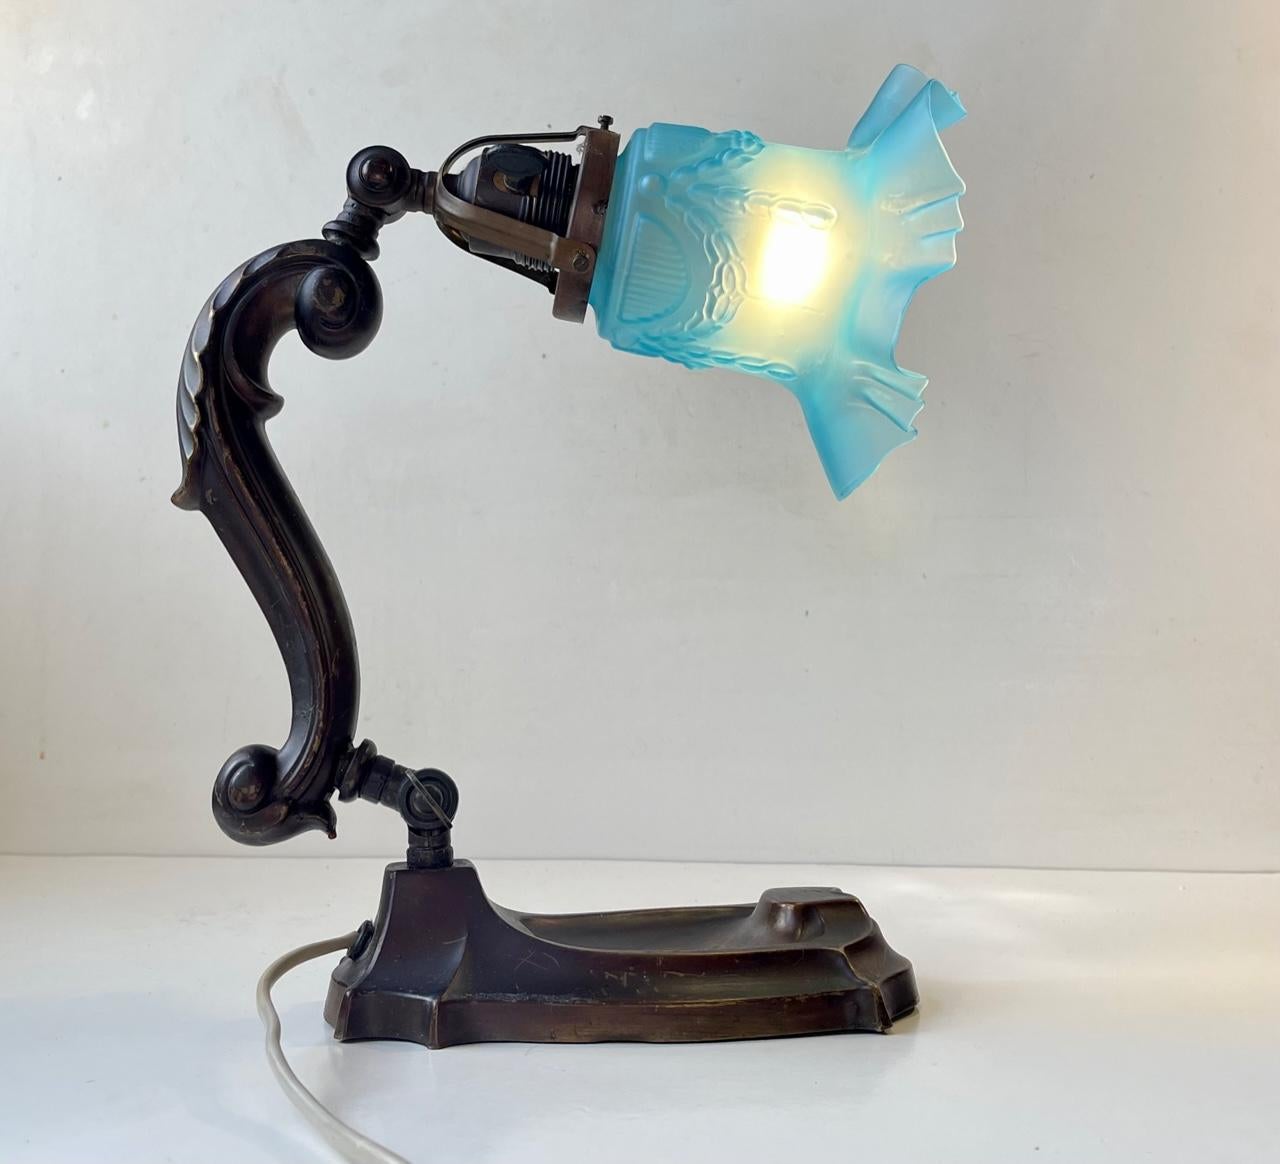 A beautifully crafted and detailed Table, Piano or Mantle Lamp. Distinct Art Nouveau styling. Its pivoting and fully adjustable. Made from patinated 'embossed'/molded bronze and has a wavy frosted light blue glass shade modulated with impressions of